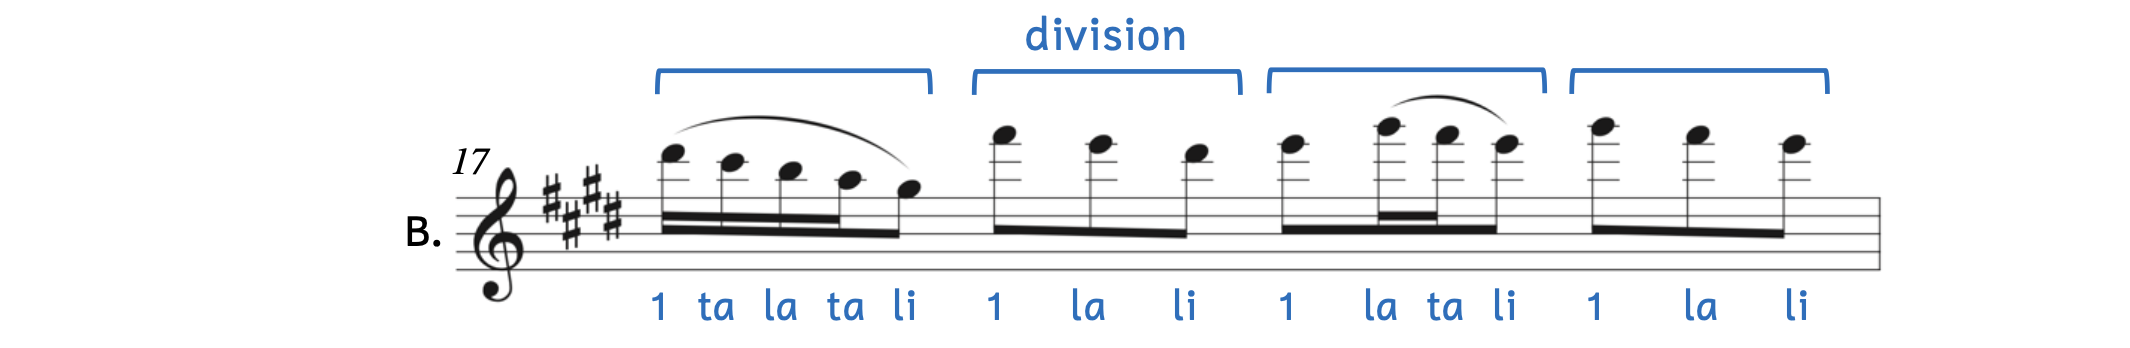 Illustration of a dotted note beat in Vivaldi's Four Seasons. The dotted quarter note equals one beat. Four sixteenth notes and an eighth note beamed together equals one beat. Three eighth notes equal one beat. An eighth note beamed to two sixteenth notes and an eighth note equals one beat. Three eighth notes equal one beat. The annotation shows the three eighth notes beamed together are an example of the beat's division. The rhythm syllables are written below. They are 1, tah, la, tah, lee, 1, la, li, 1, la, tah, lee, 1, la, lee.